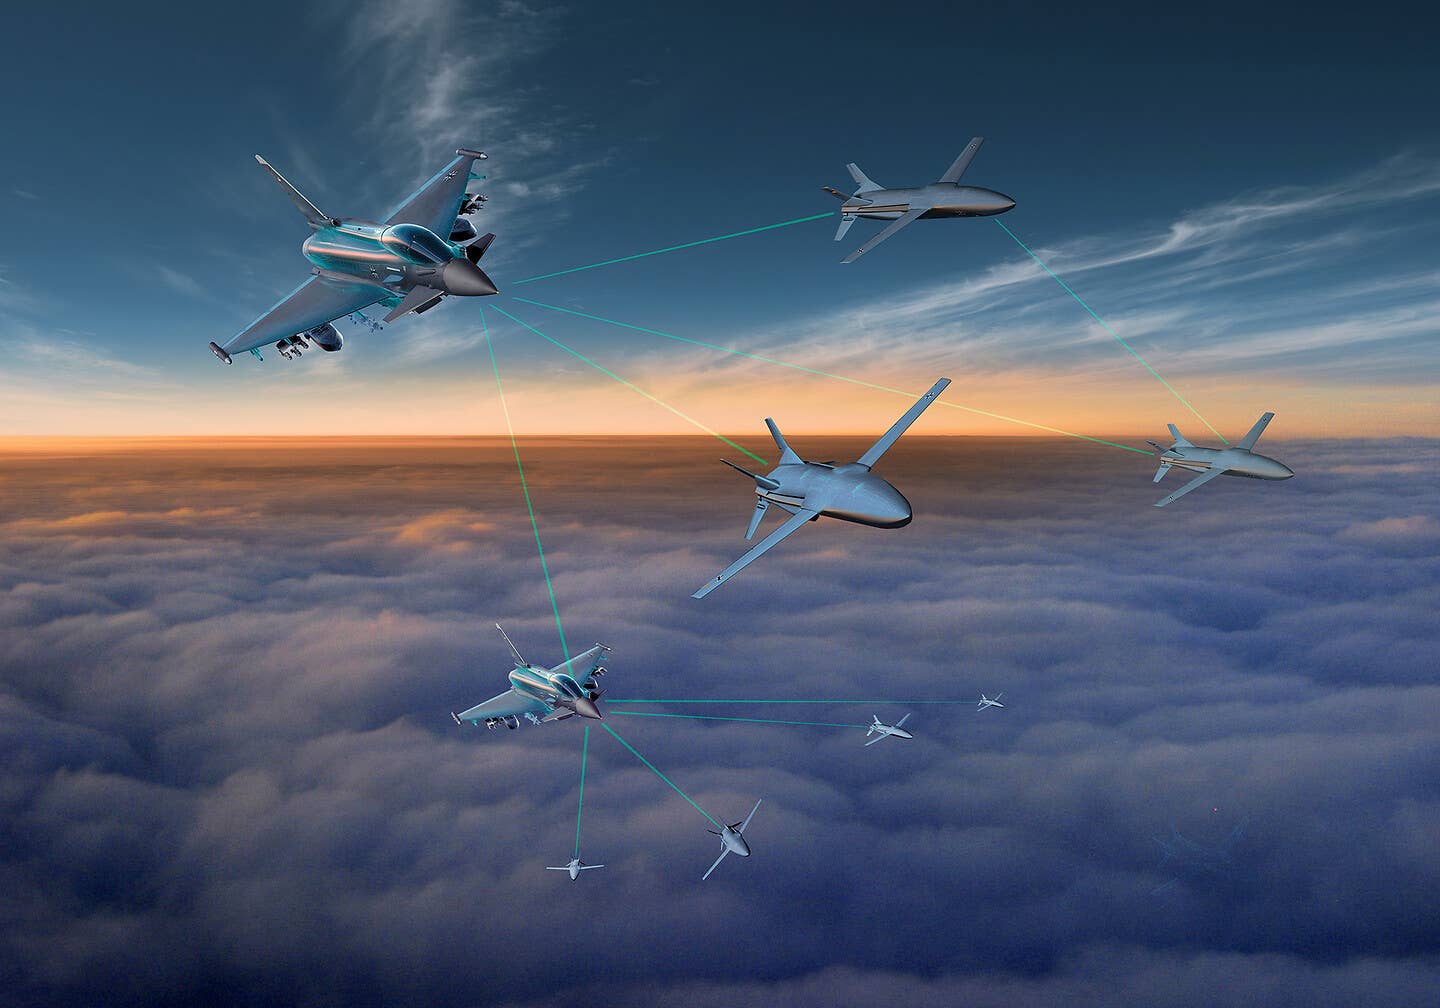 The U.S. is by no means alone when it comes to this concept, allies and enemies alike are pursuing it. Here we see a rendering from Airbus of manned-unmanned teaming with Typhoon fighters. (Airbus)